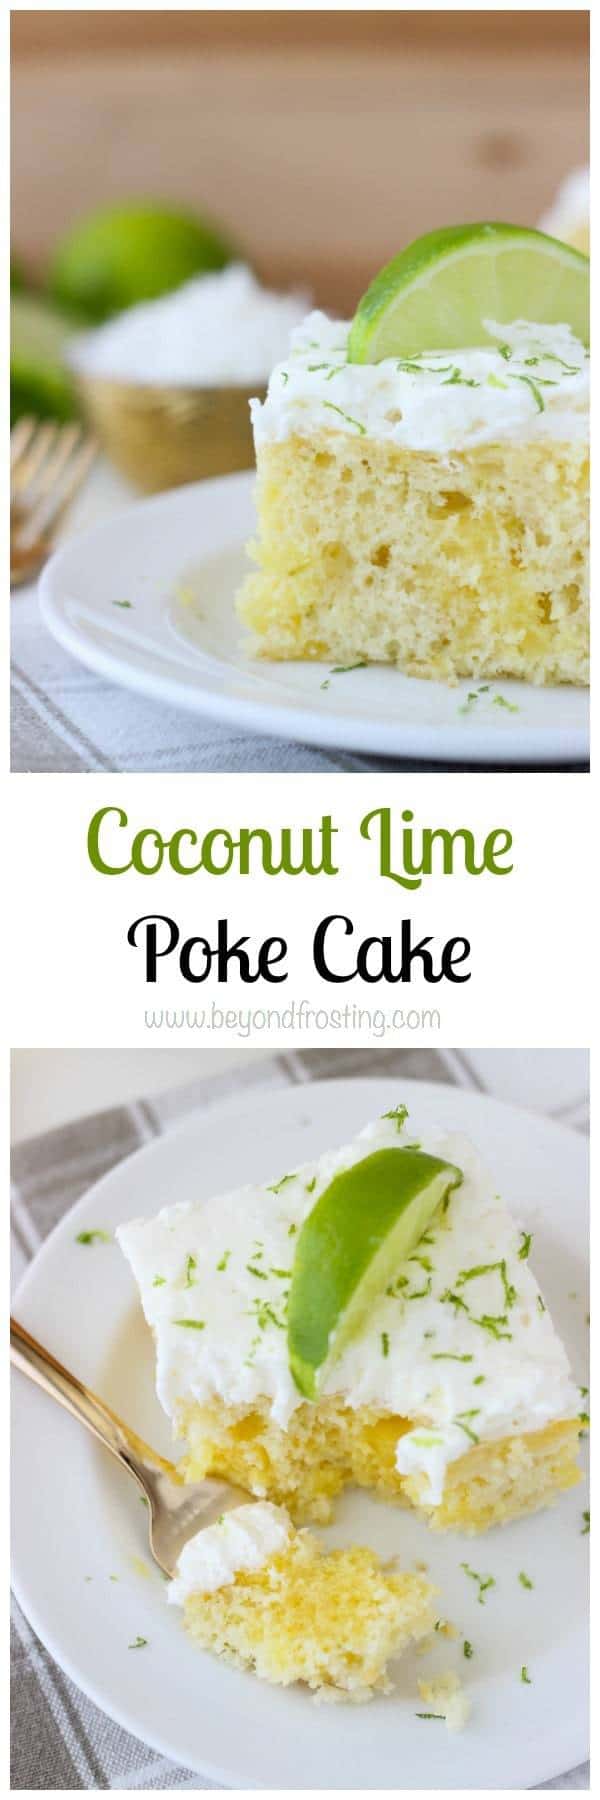 This Coconut Lime Poke Cake is a vanilla cake, with coconut milk, loaded with fresh lime and topped with a coconut whipped cream. It's such a refreshing summer cake!